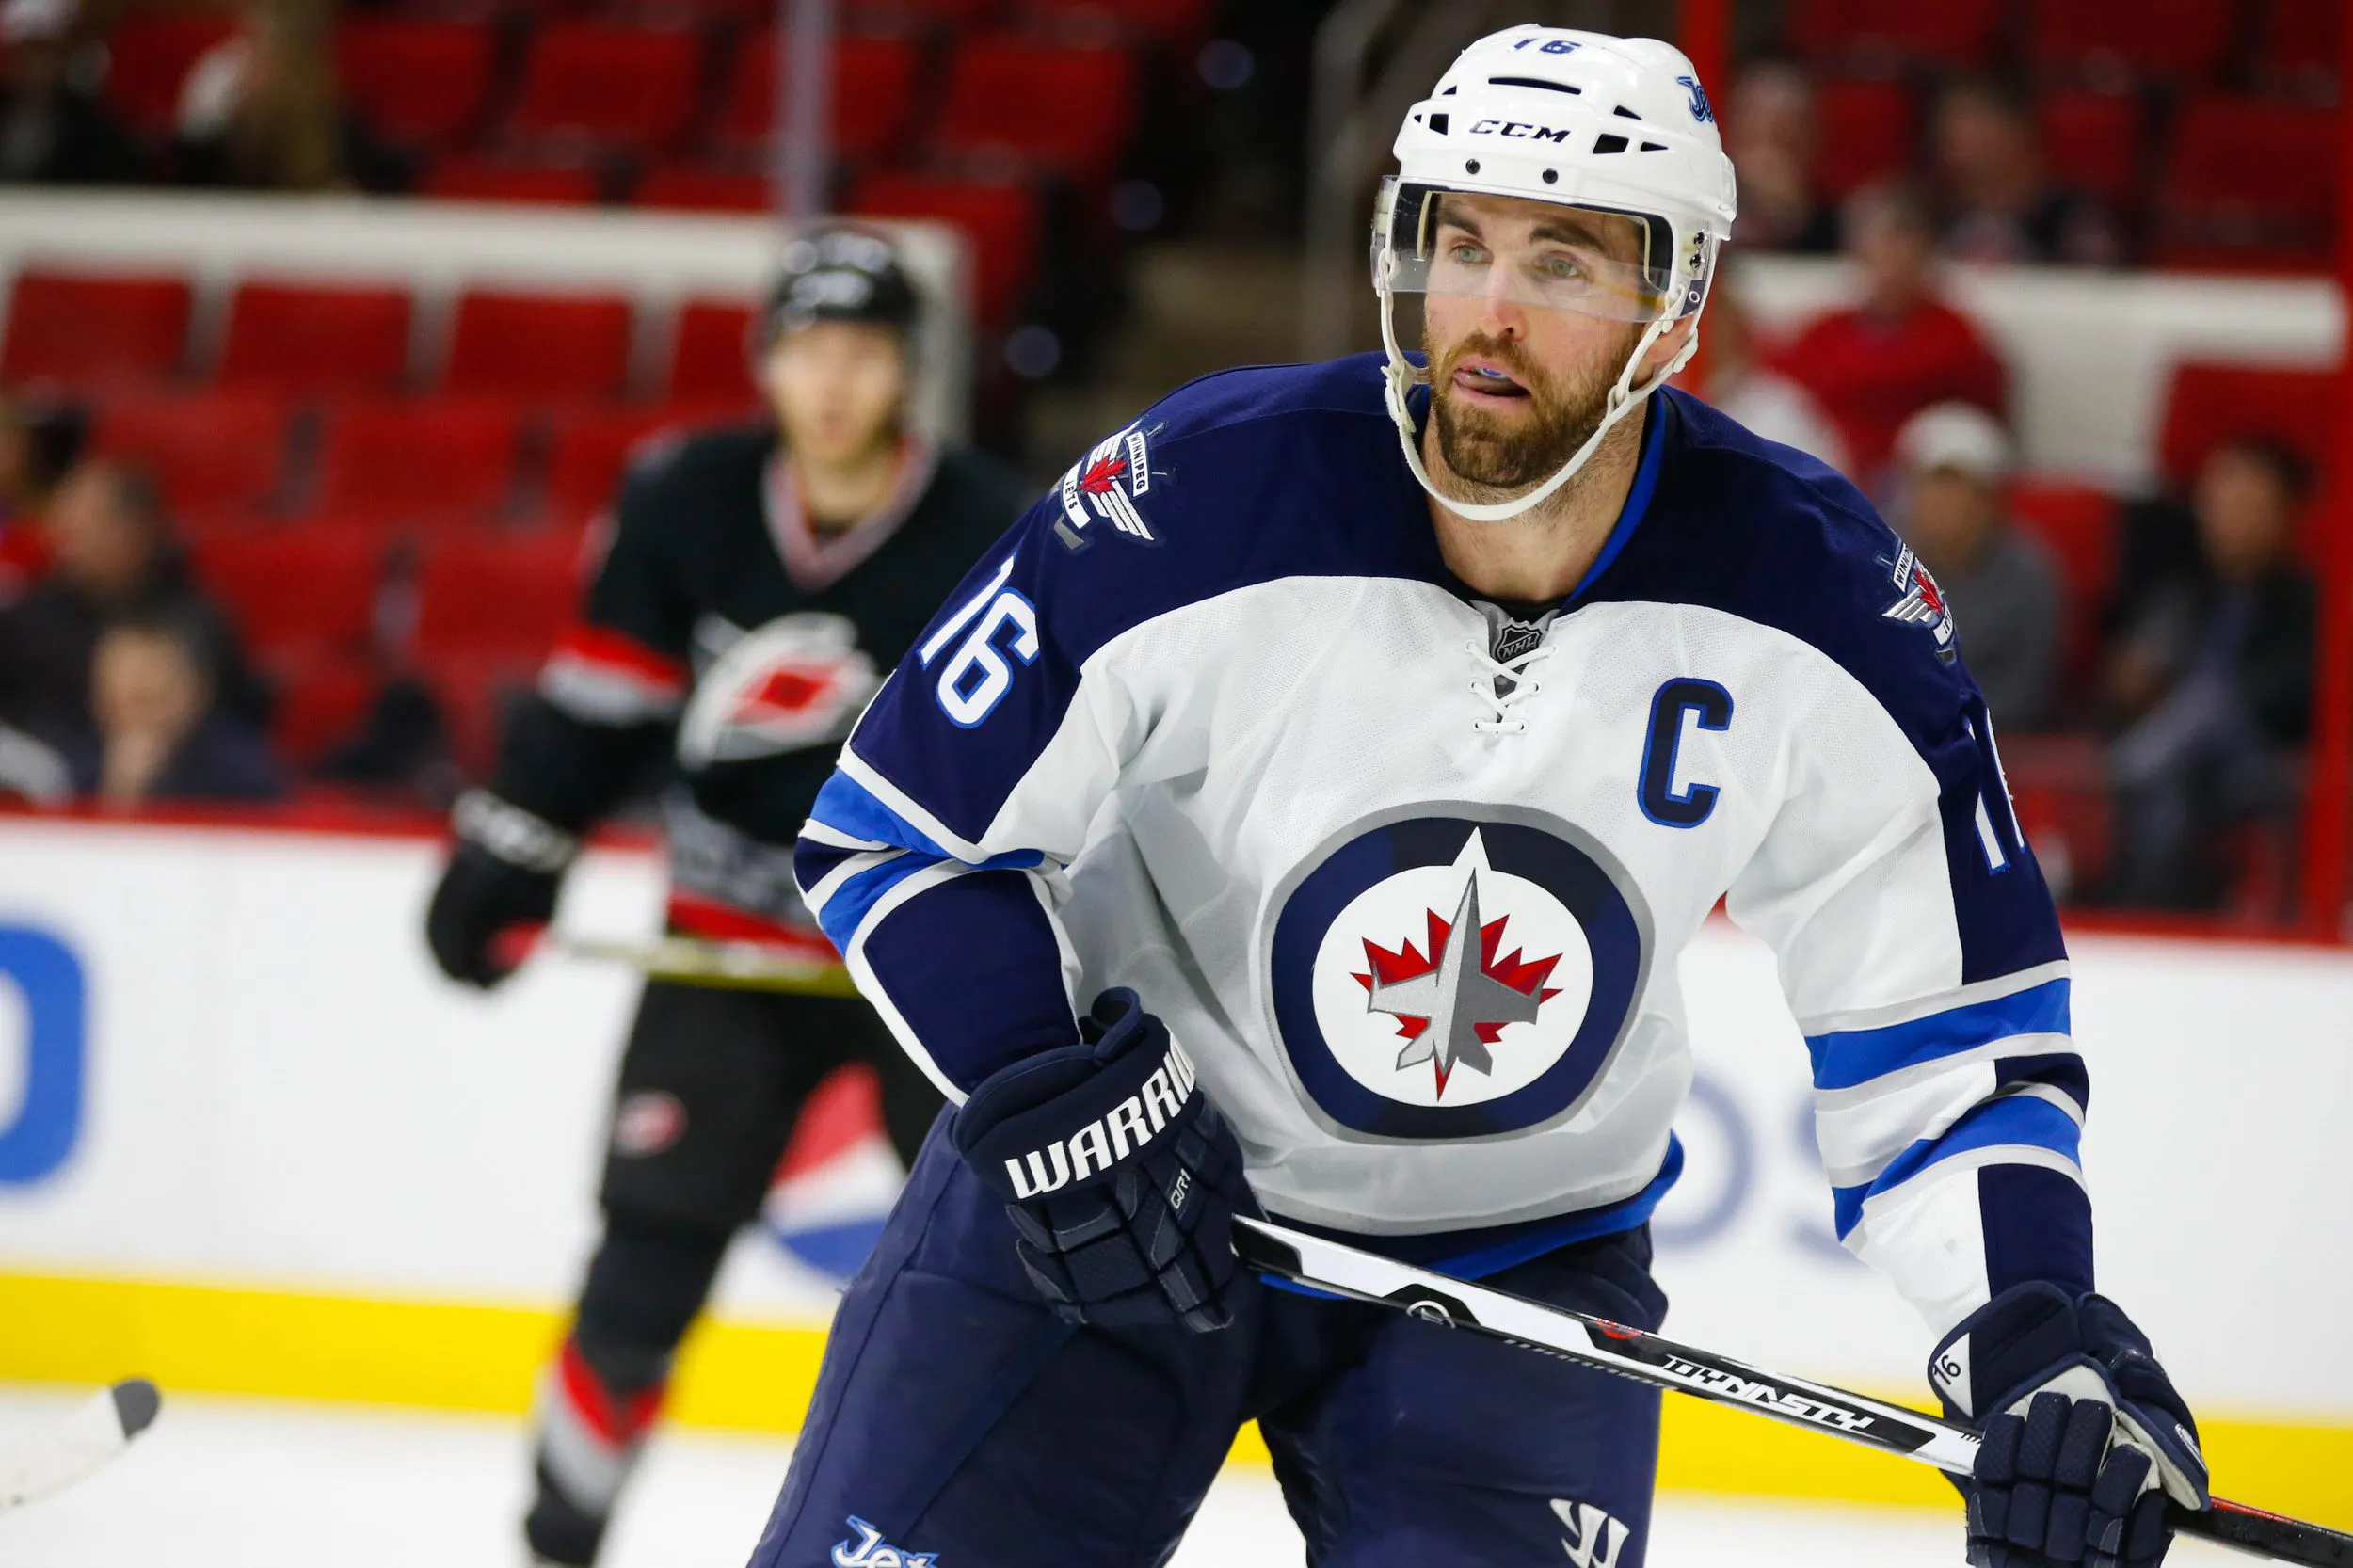 Andrew Ladd announces retirement after 16-season career